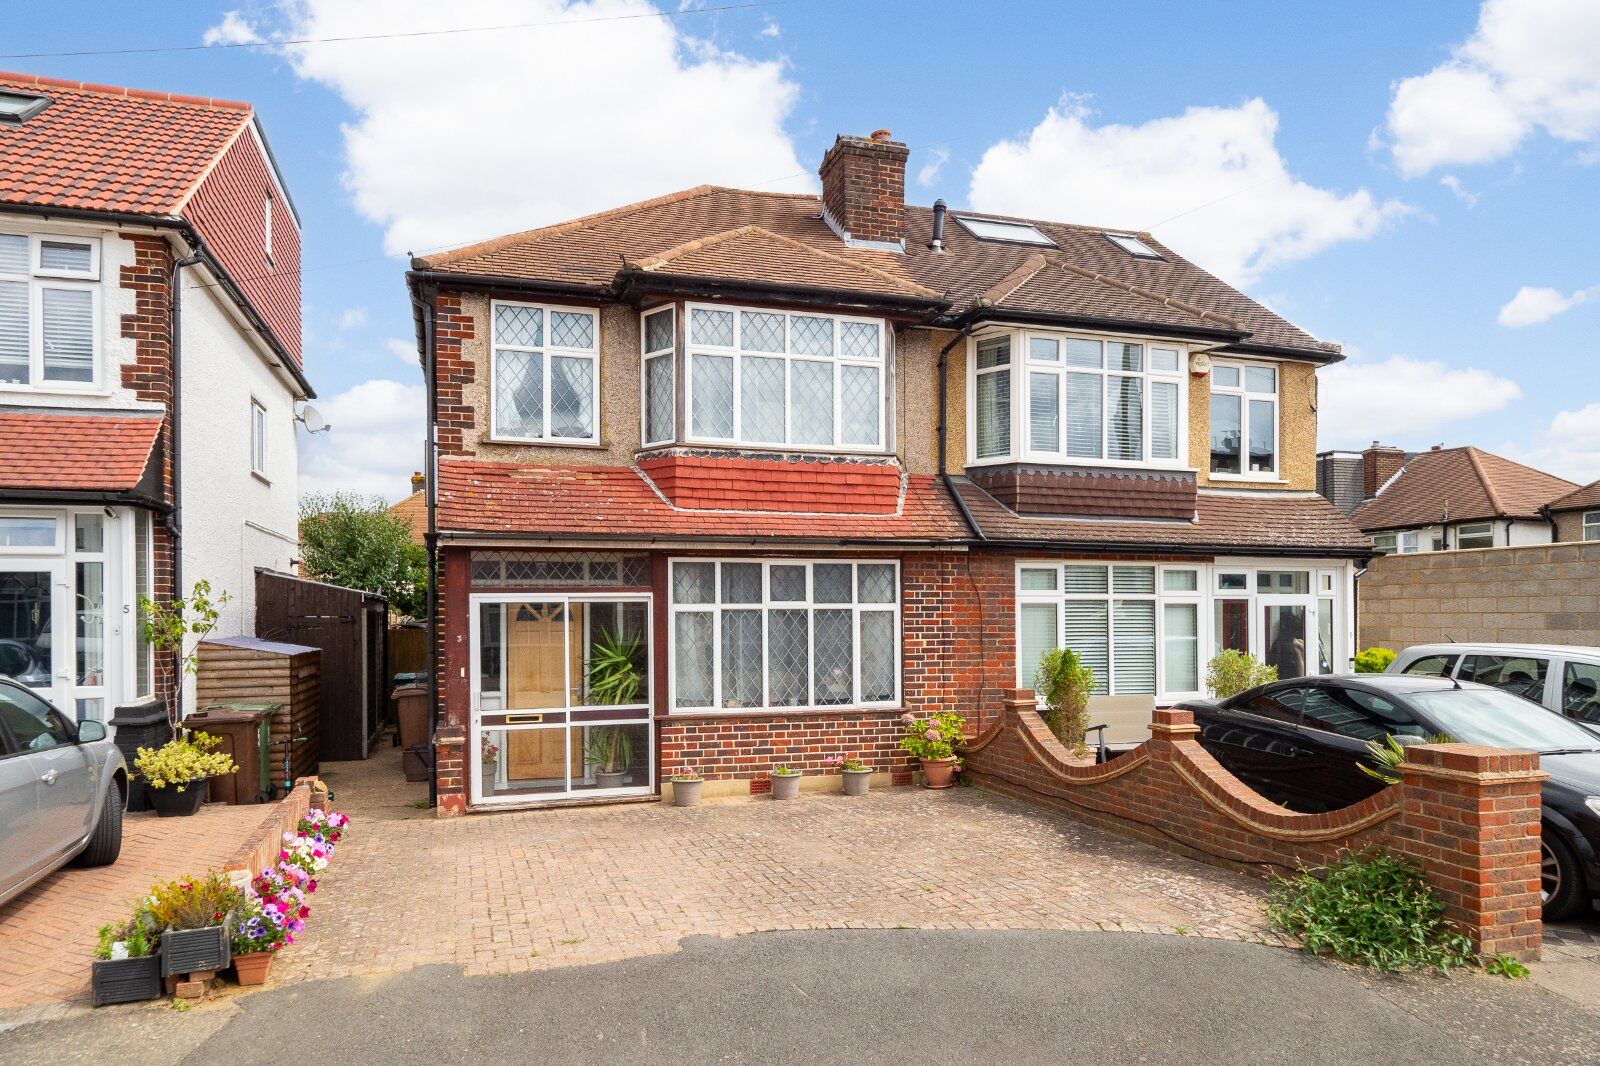 3 bedroom semi detached house for sale Egham Close, Cheam, SM3, main image